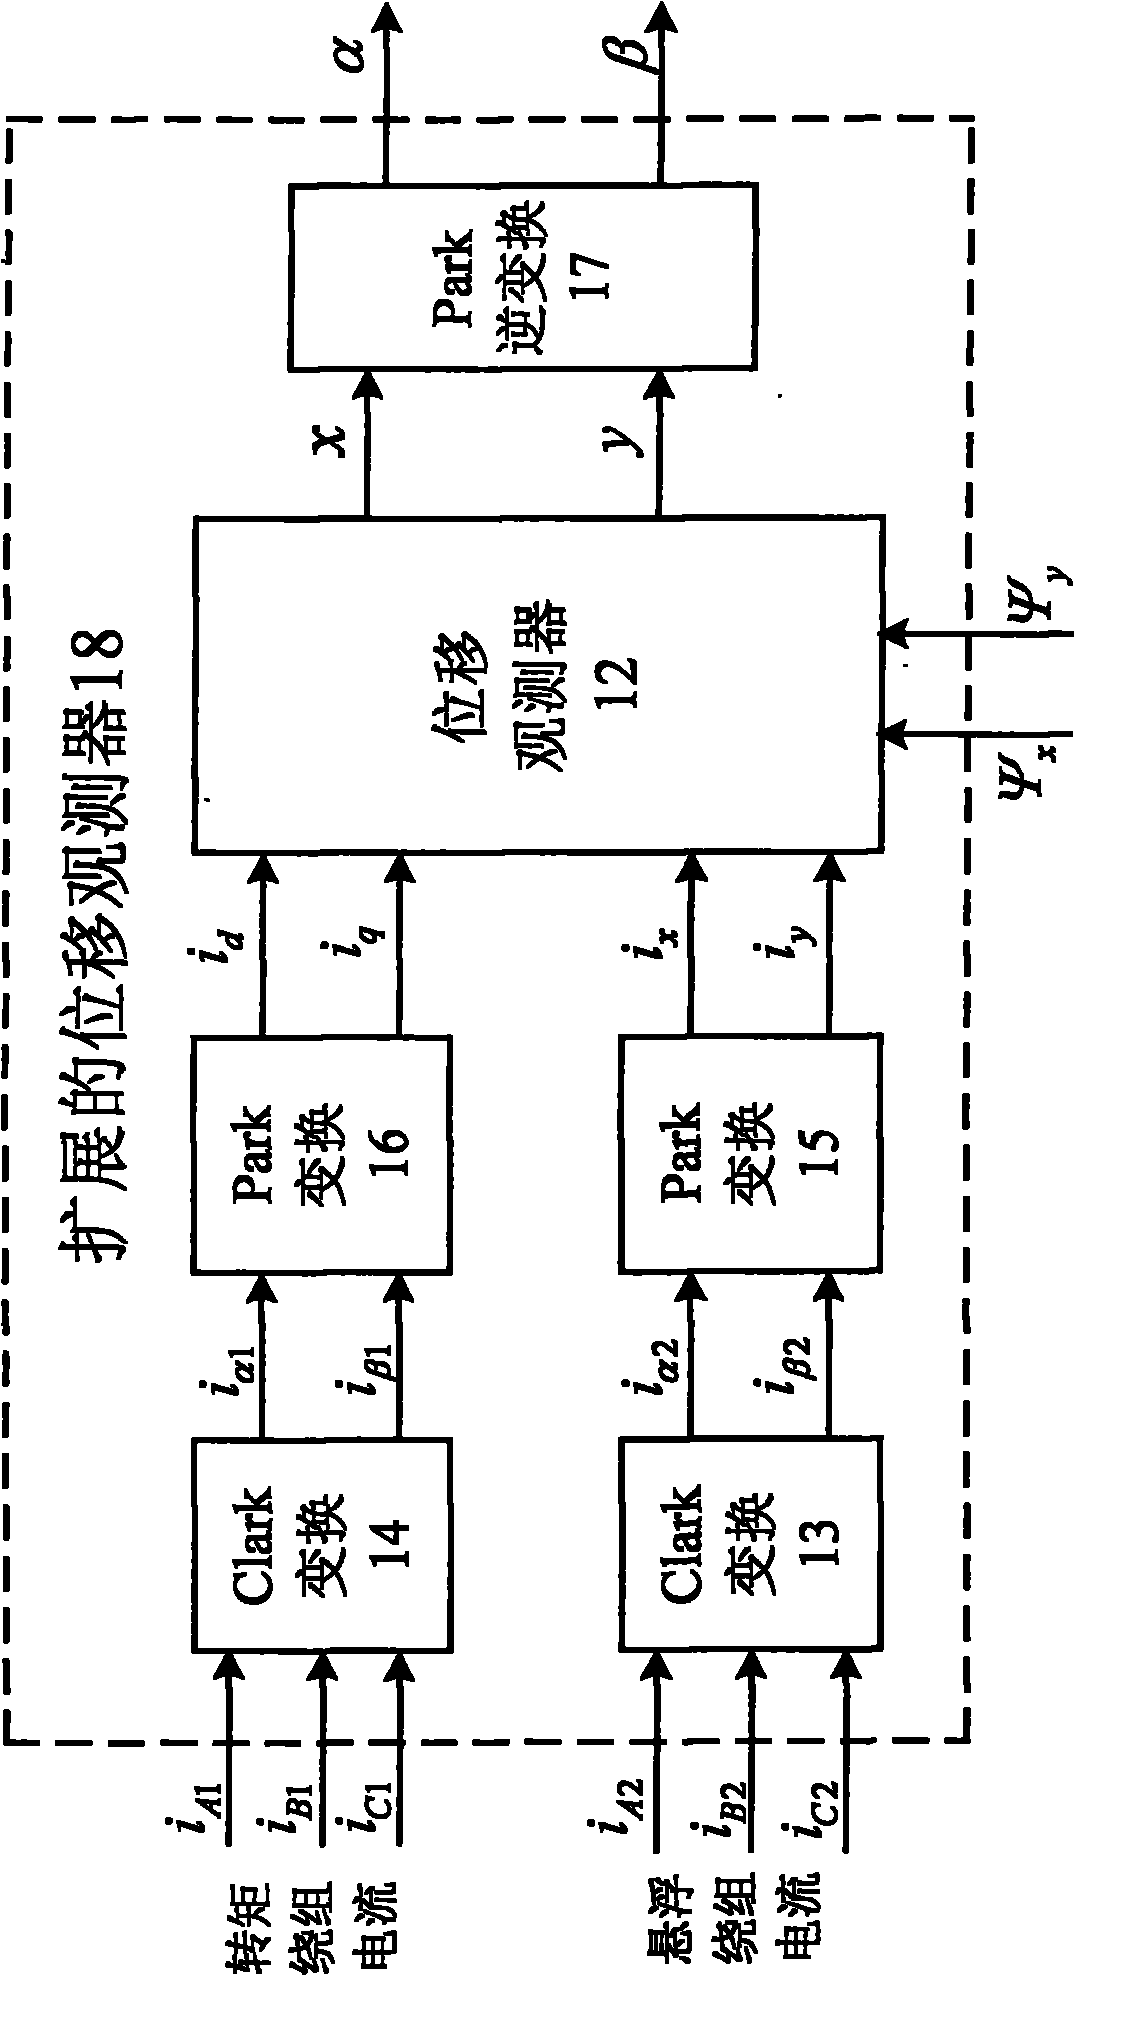 Bearing-free synchronous reluctance motor rotor displacement soft measurement and suspension system construction method